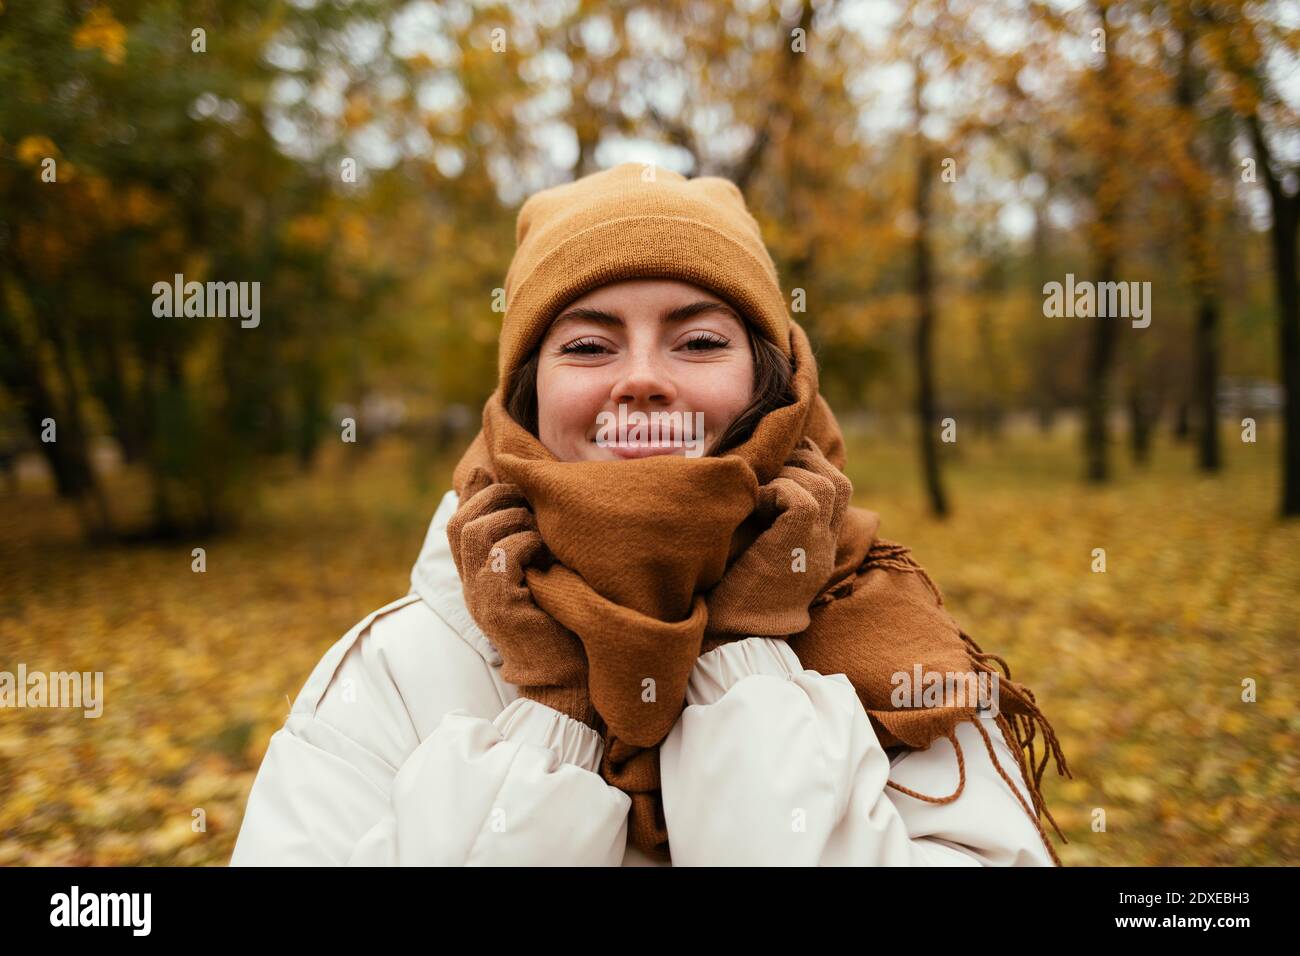 Smiling young woman wrapped up in scarf in autumn park Stock Photo